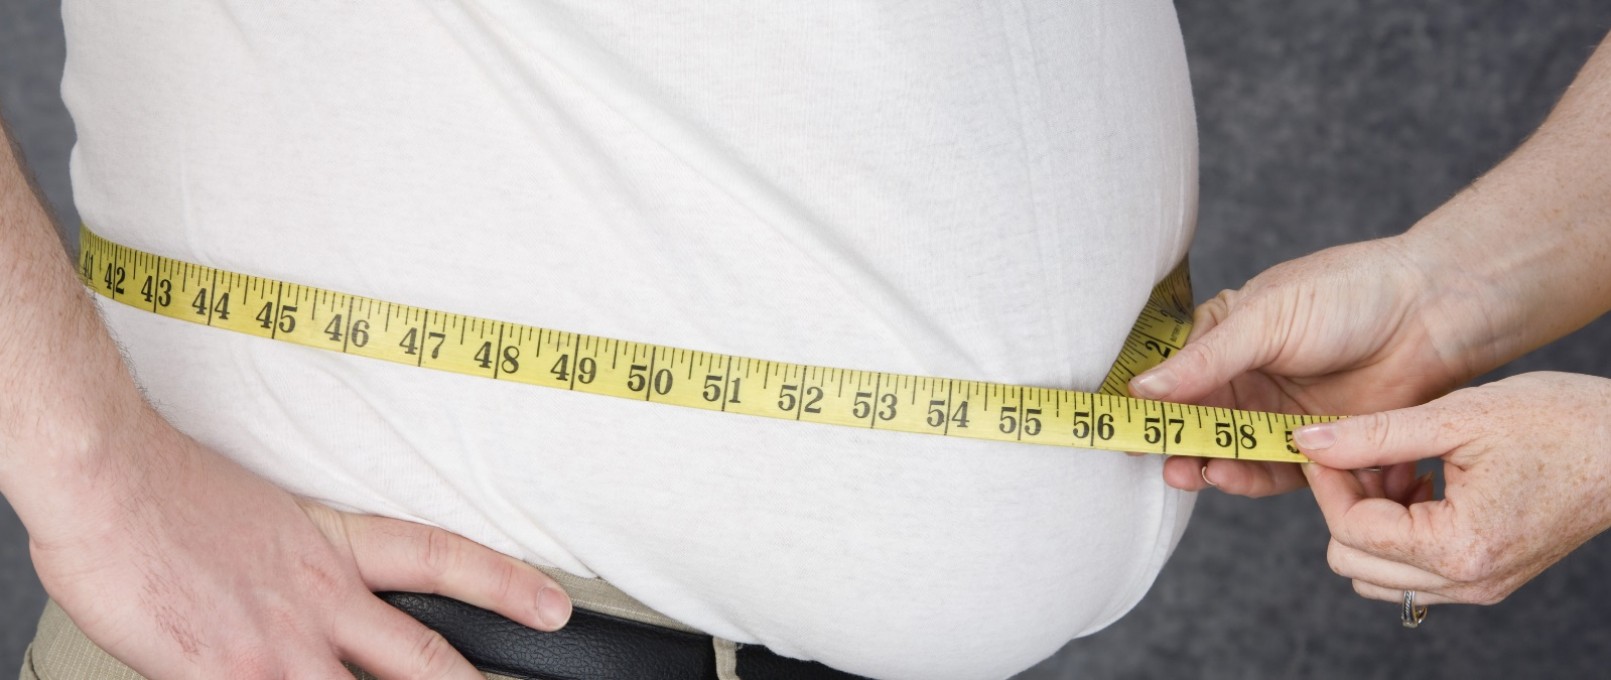 Obesity is no longer your fate with bariatric surgery